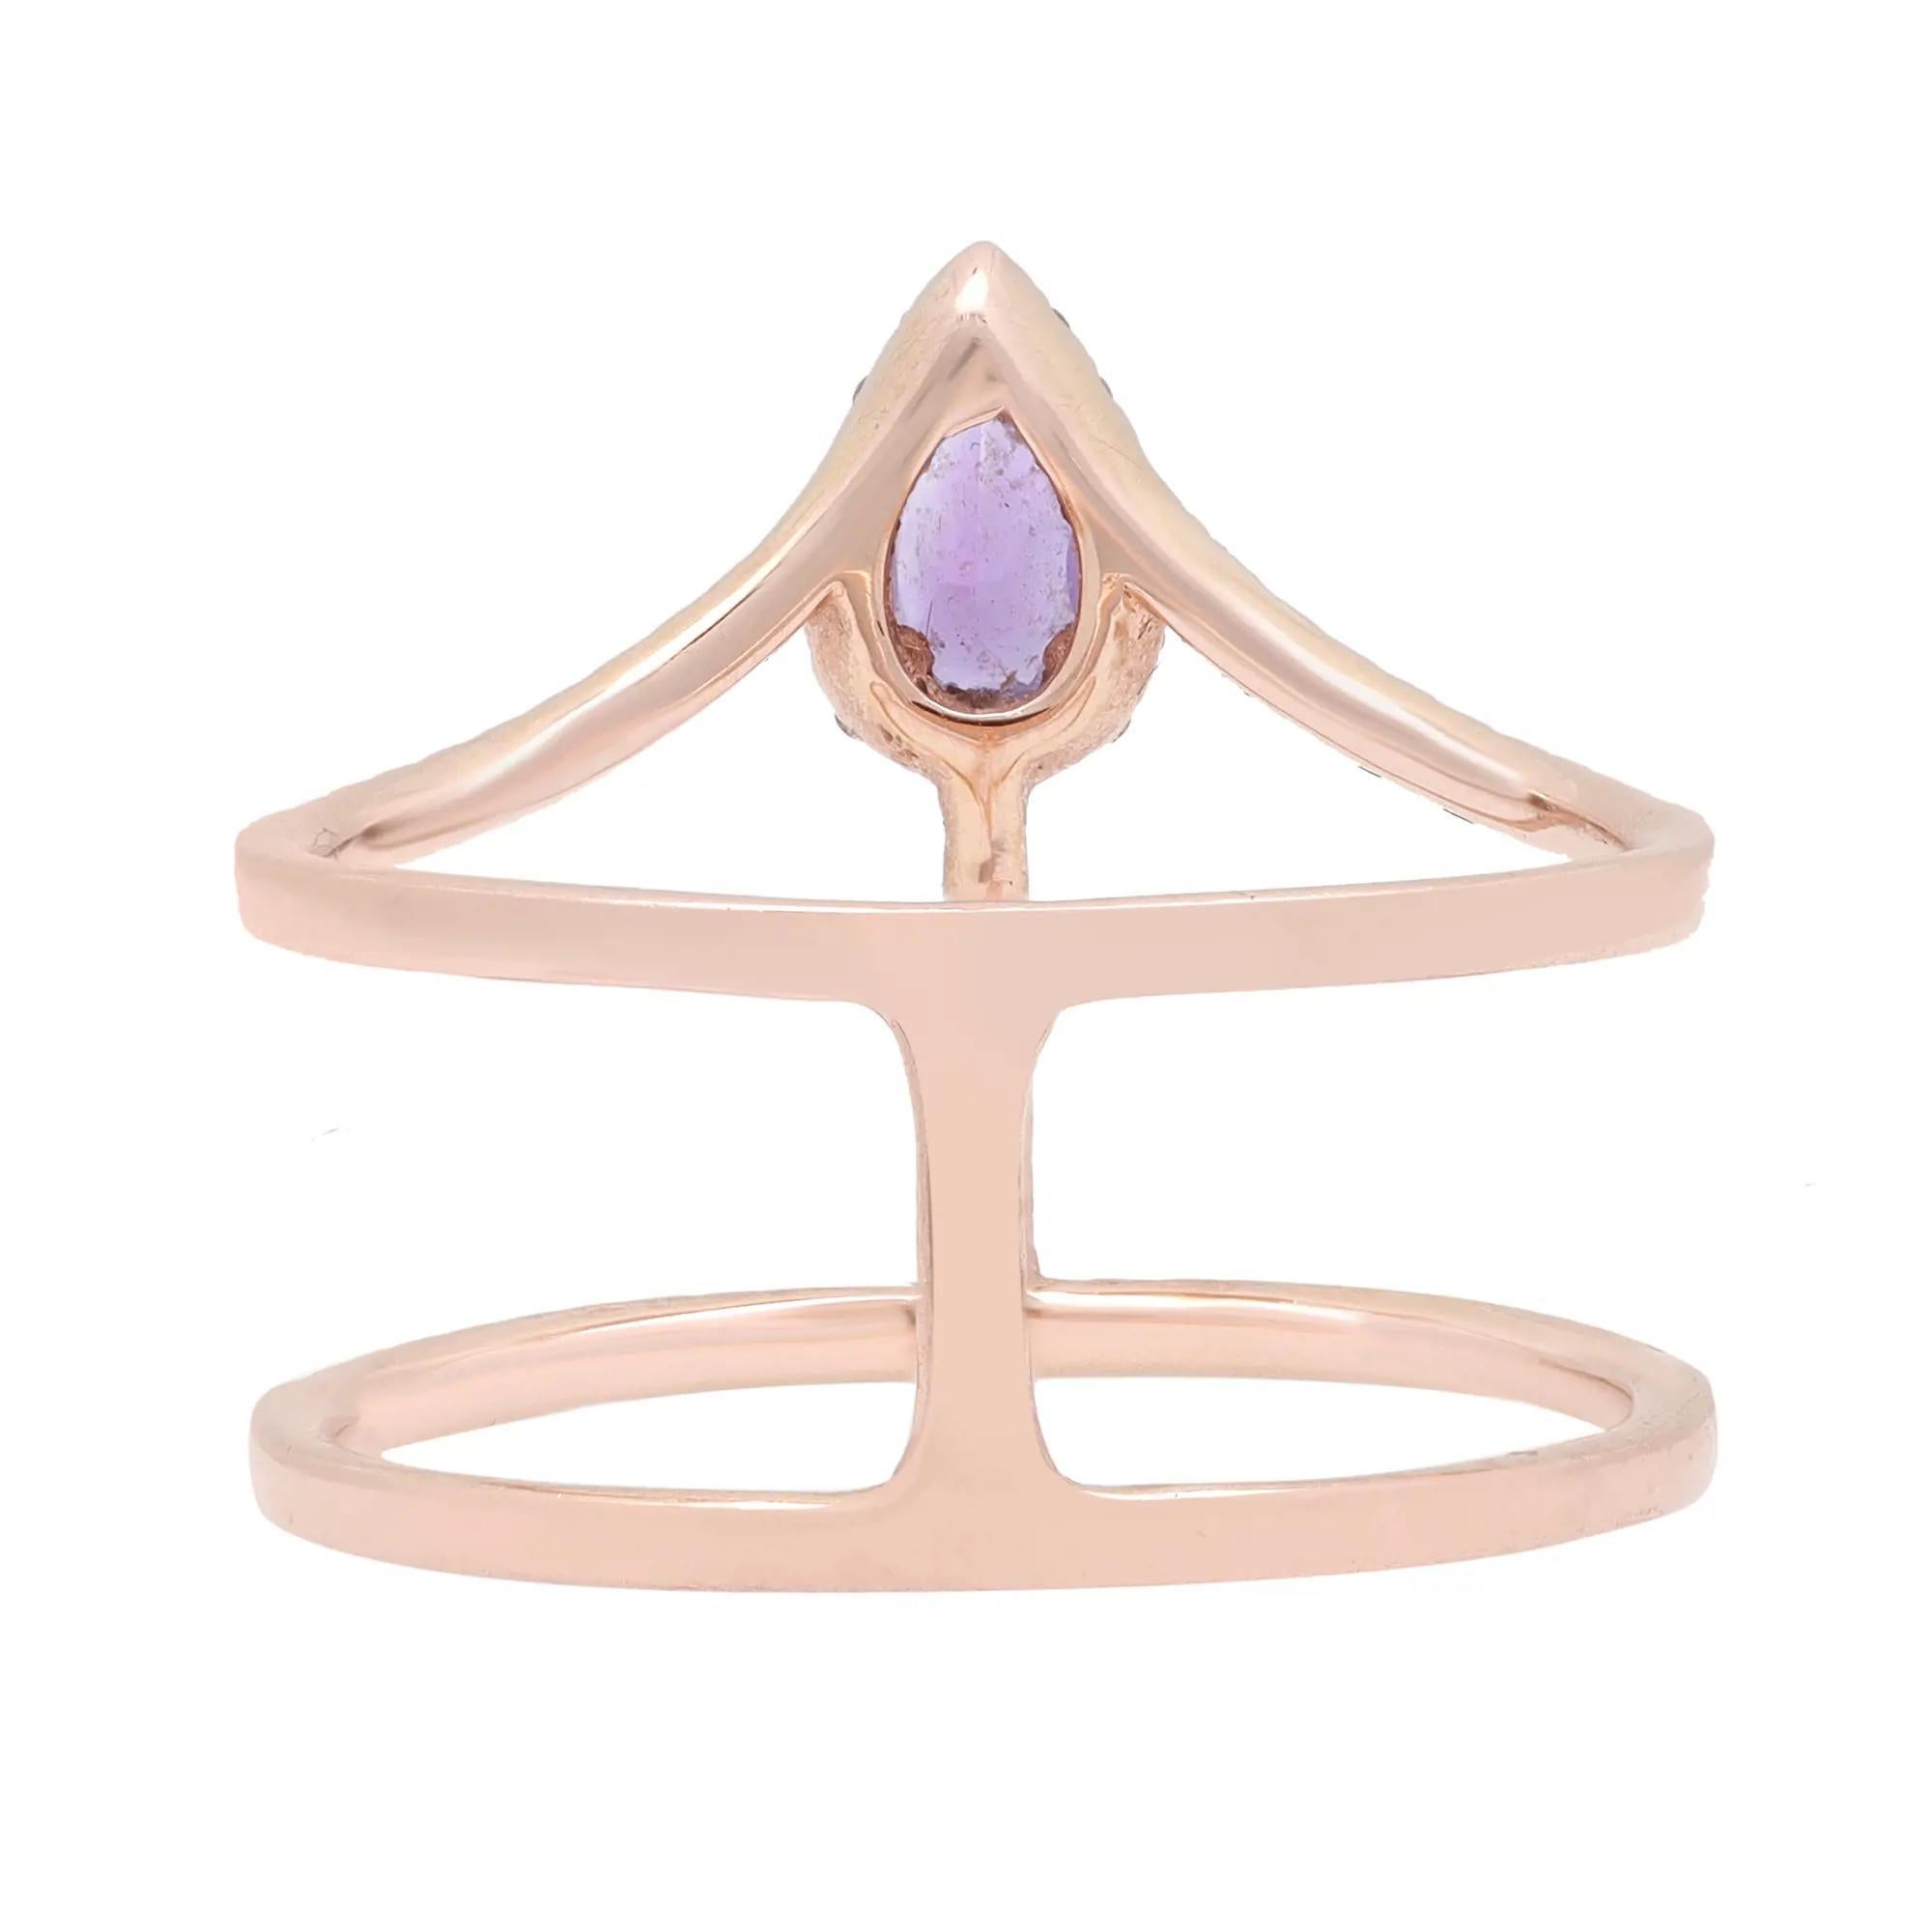 This wide fancy statement ring is crafted in fine 18k rose gold. It features prong set pear shape amethyst with pave set round brilliant cut diamonds. Total diamond weight: 0.26 carat. Ring size: 6.75. Ring width: 9mm - 15mm. Total weight: 2.72